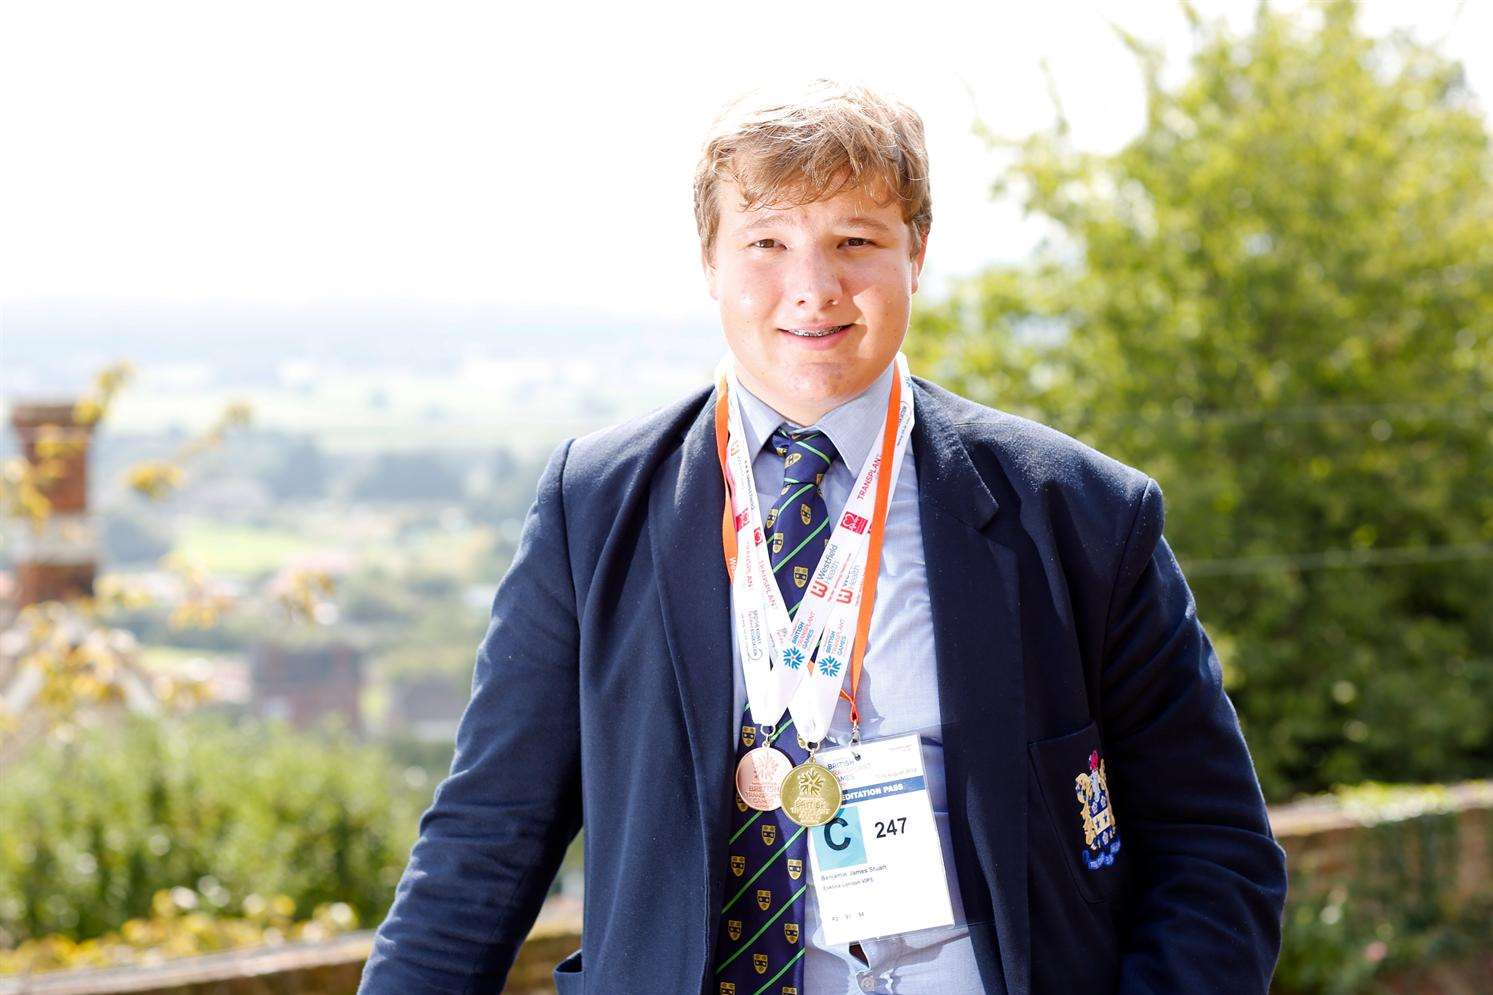 Ben Stuart ,15, who has won an gold and bronze medal at the recent British Transplant Games in archery and tennis